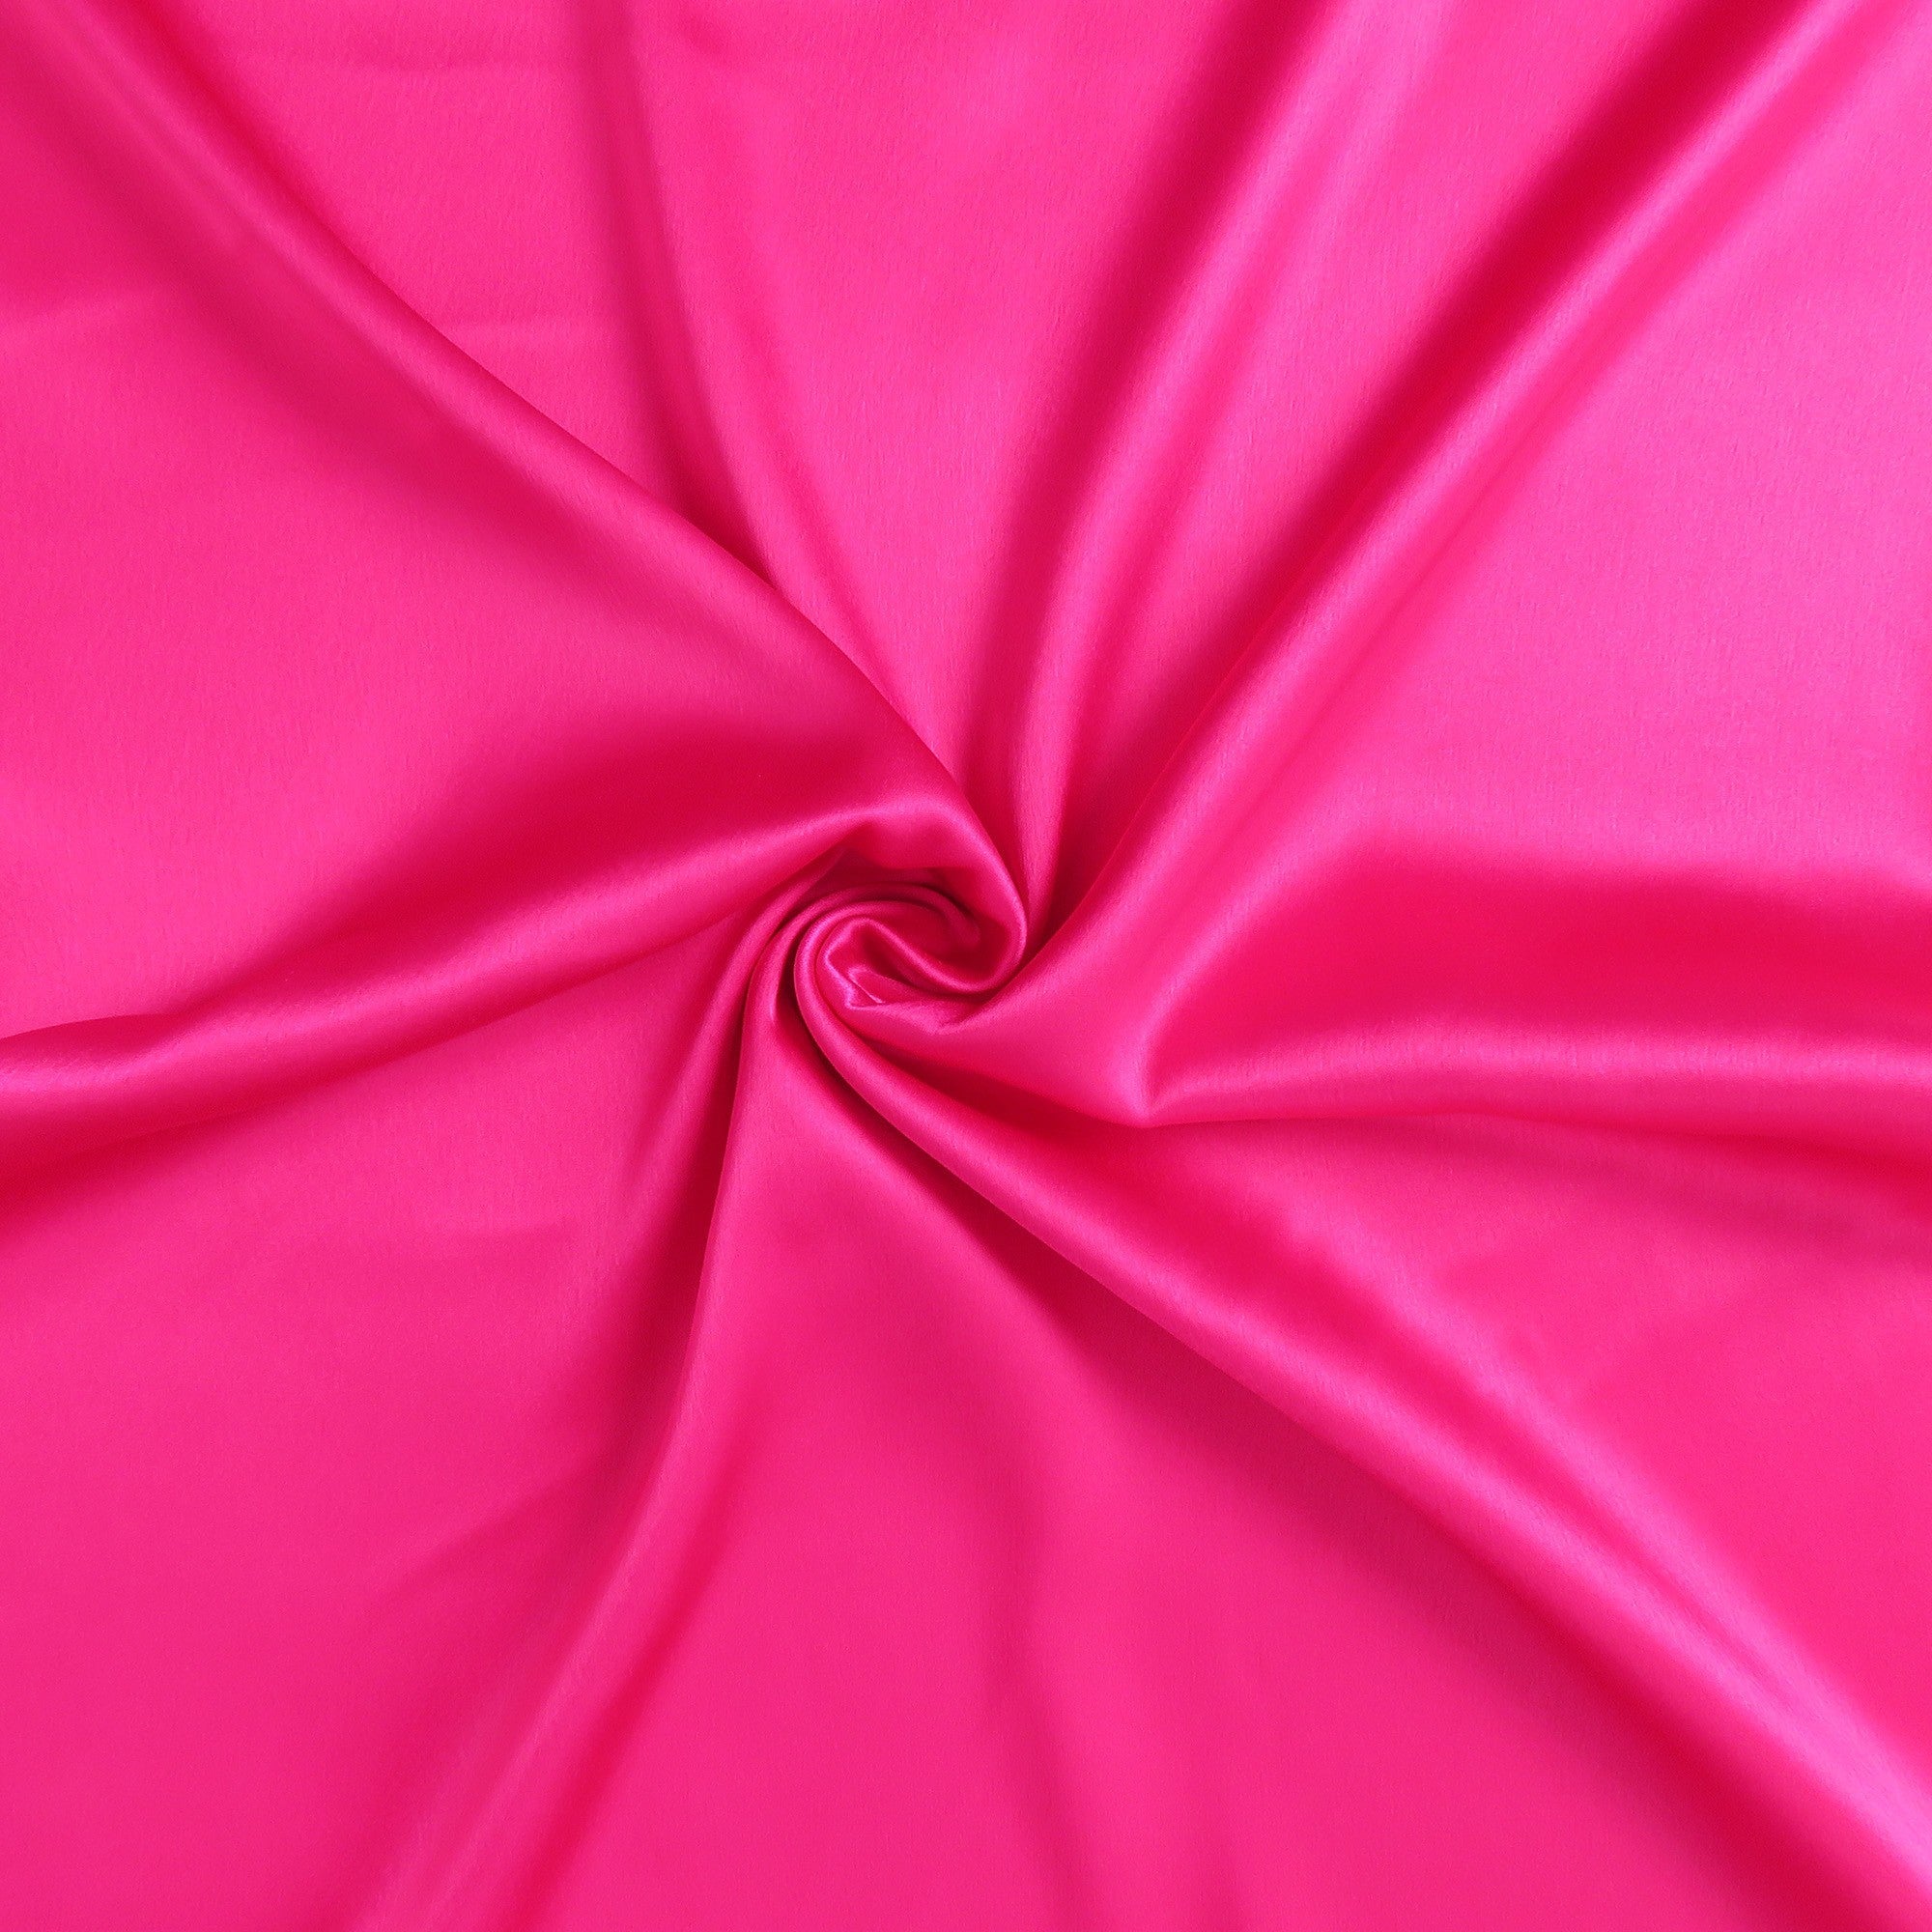 Fuchsia Dreamy Set Of 2 Silky Satin Standard Pillowcases - Tuesday Morning-Bed Sheets